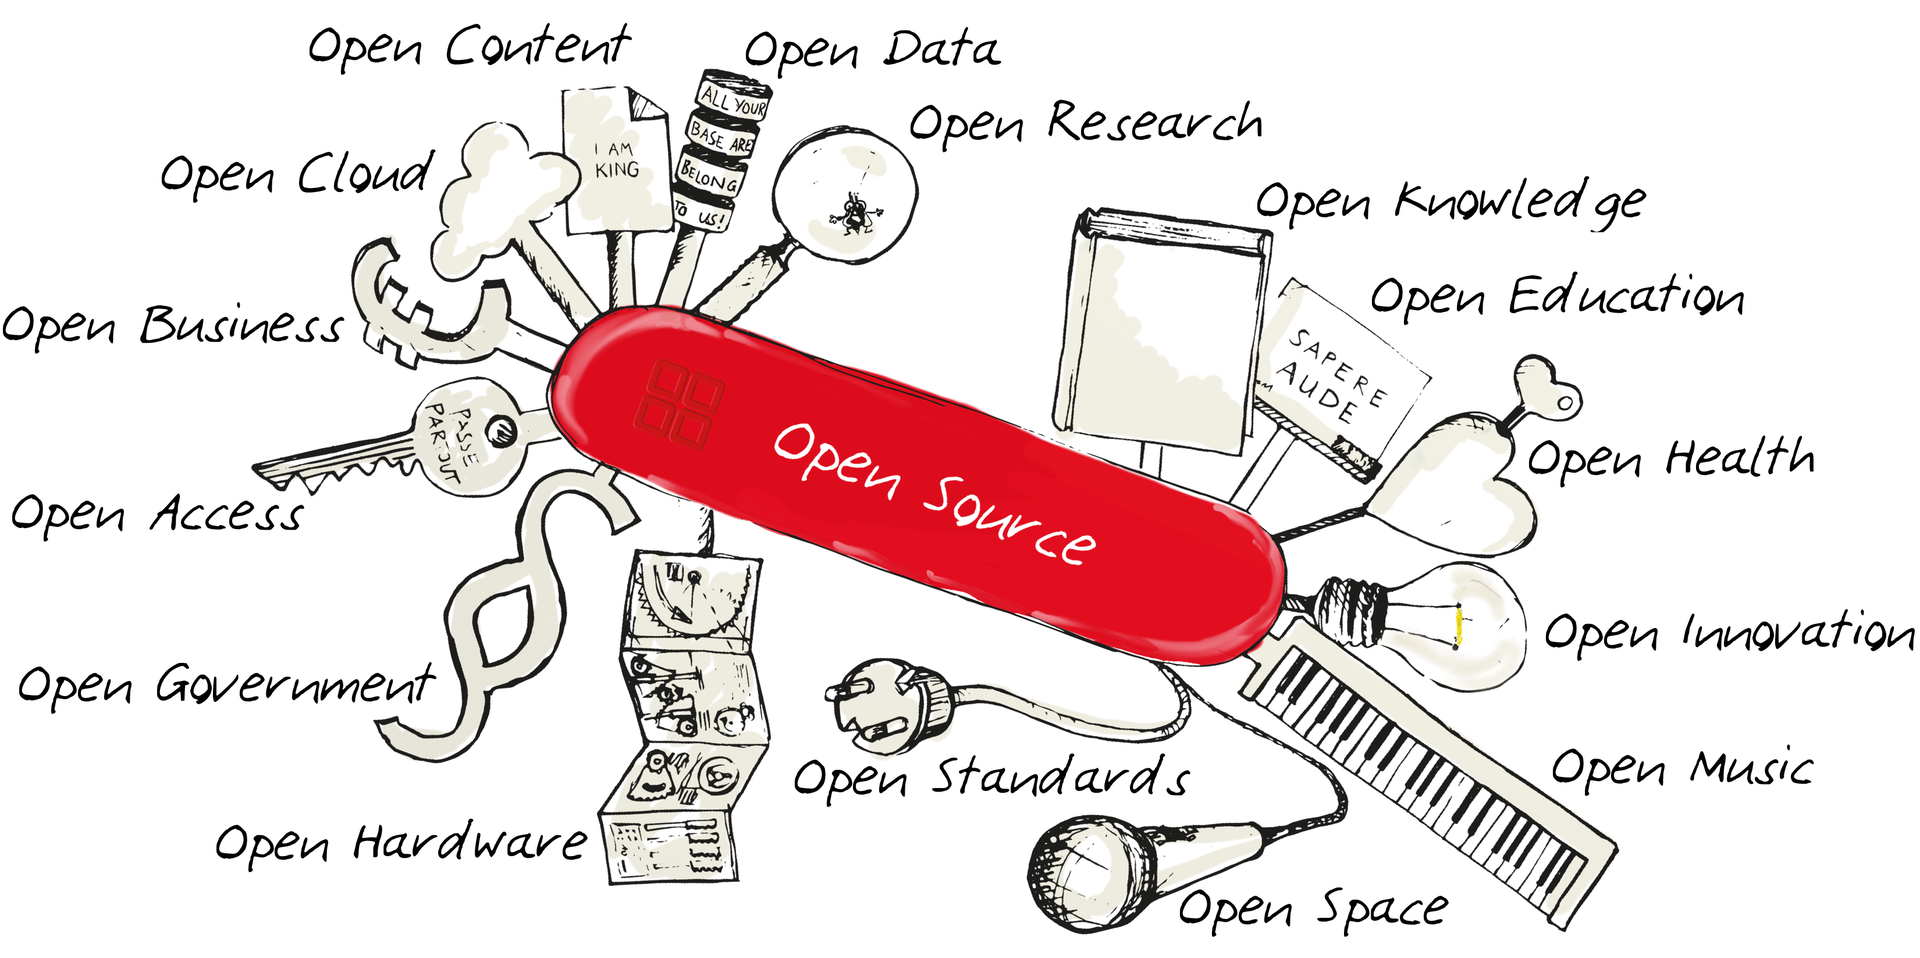 Various definitions of open source